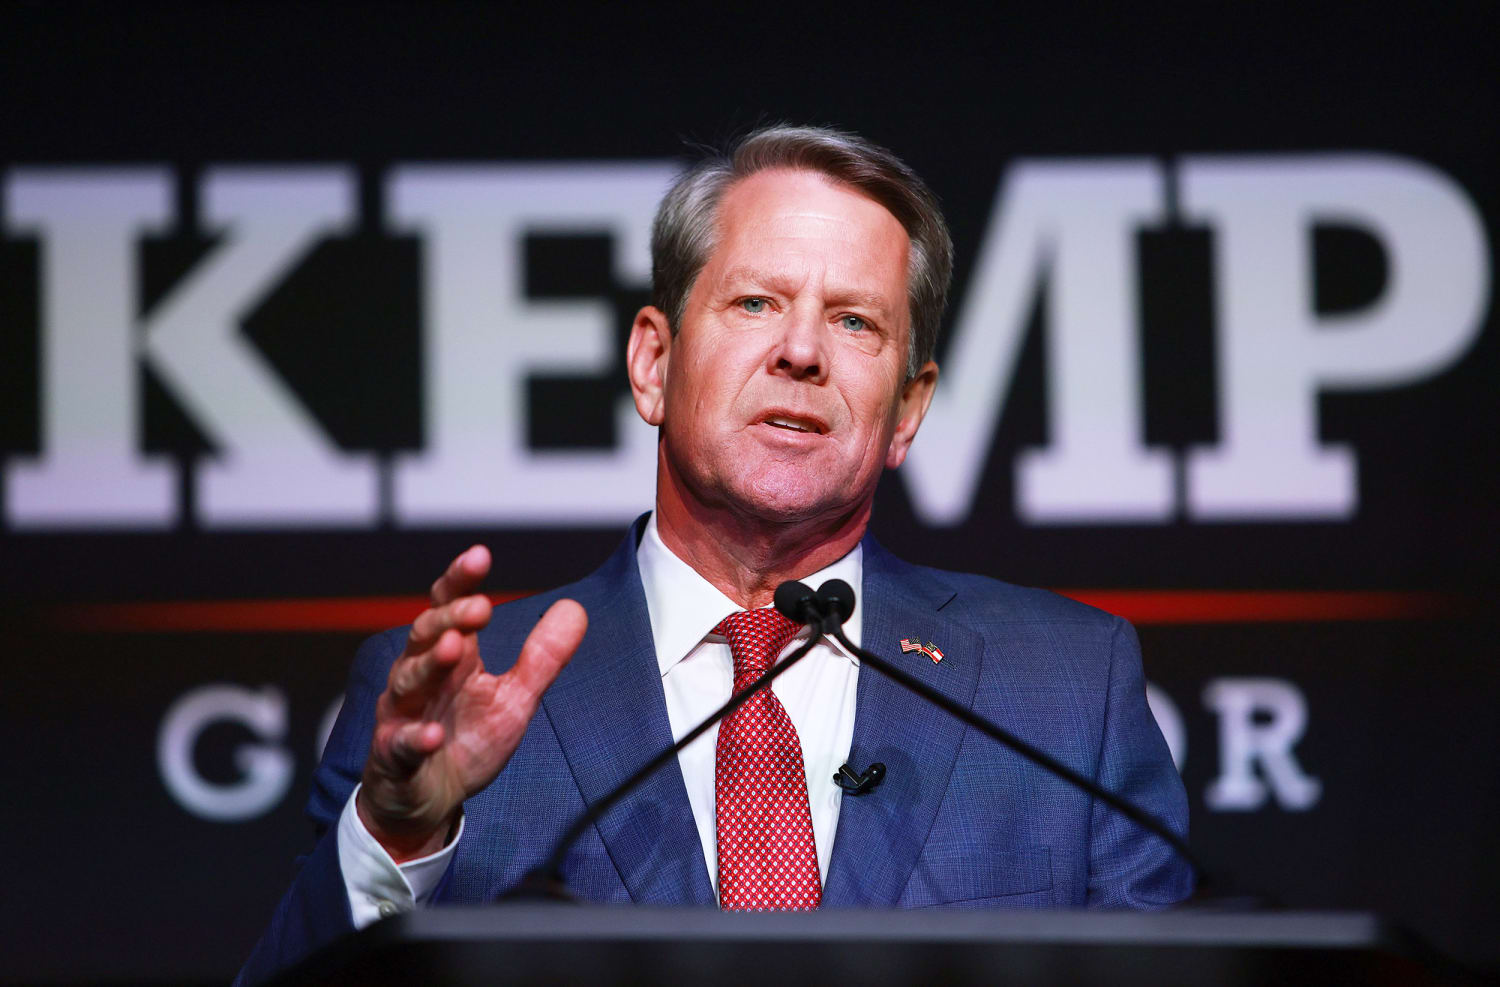 Georgia Republican Gov. Brian Kemp wins re-election, defeating Stacey Abrams in rematch